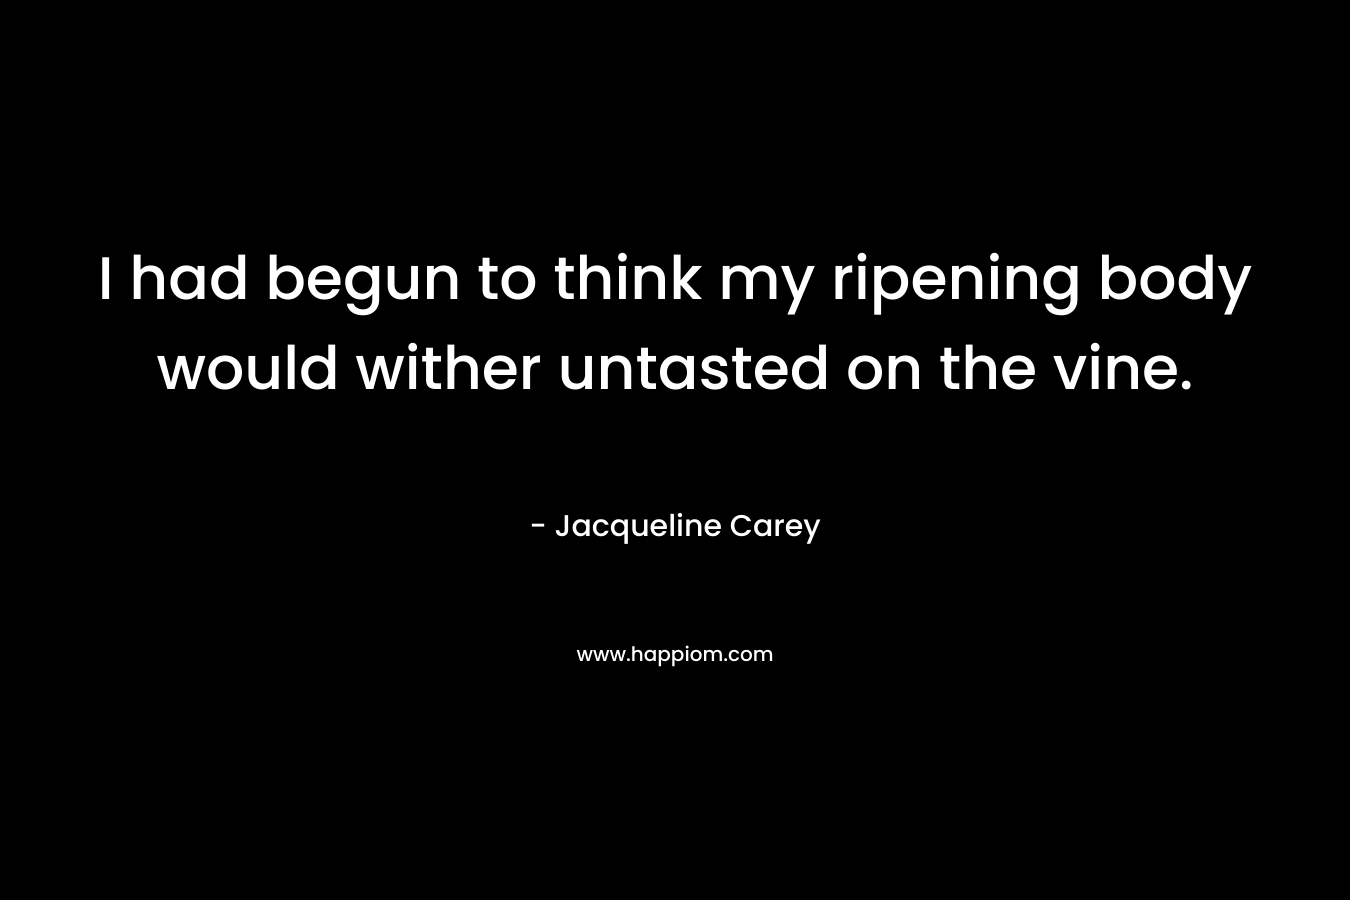 I had begun to think my ripening body would wither untasted on the vine. – Jacqueline Carey